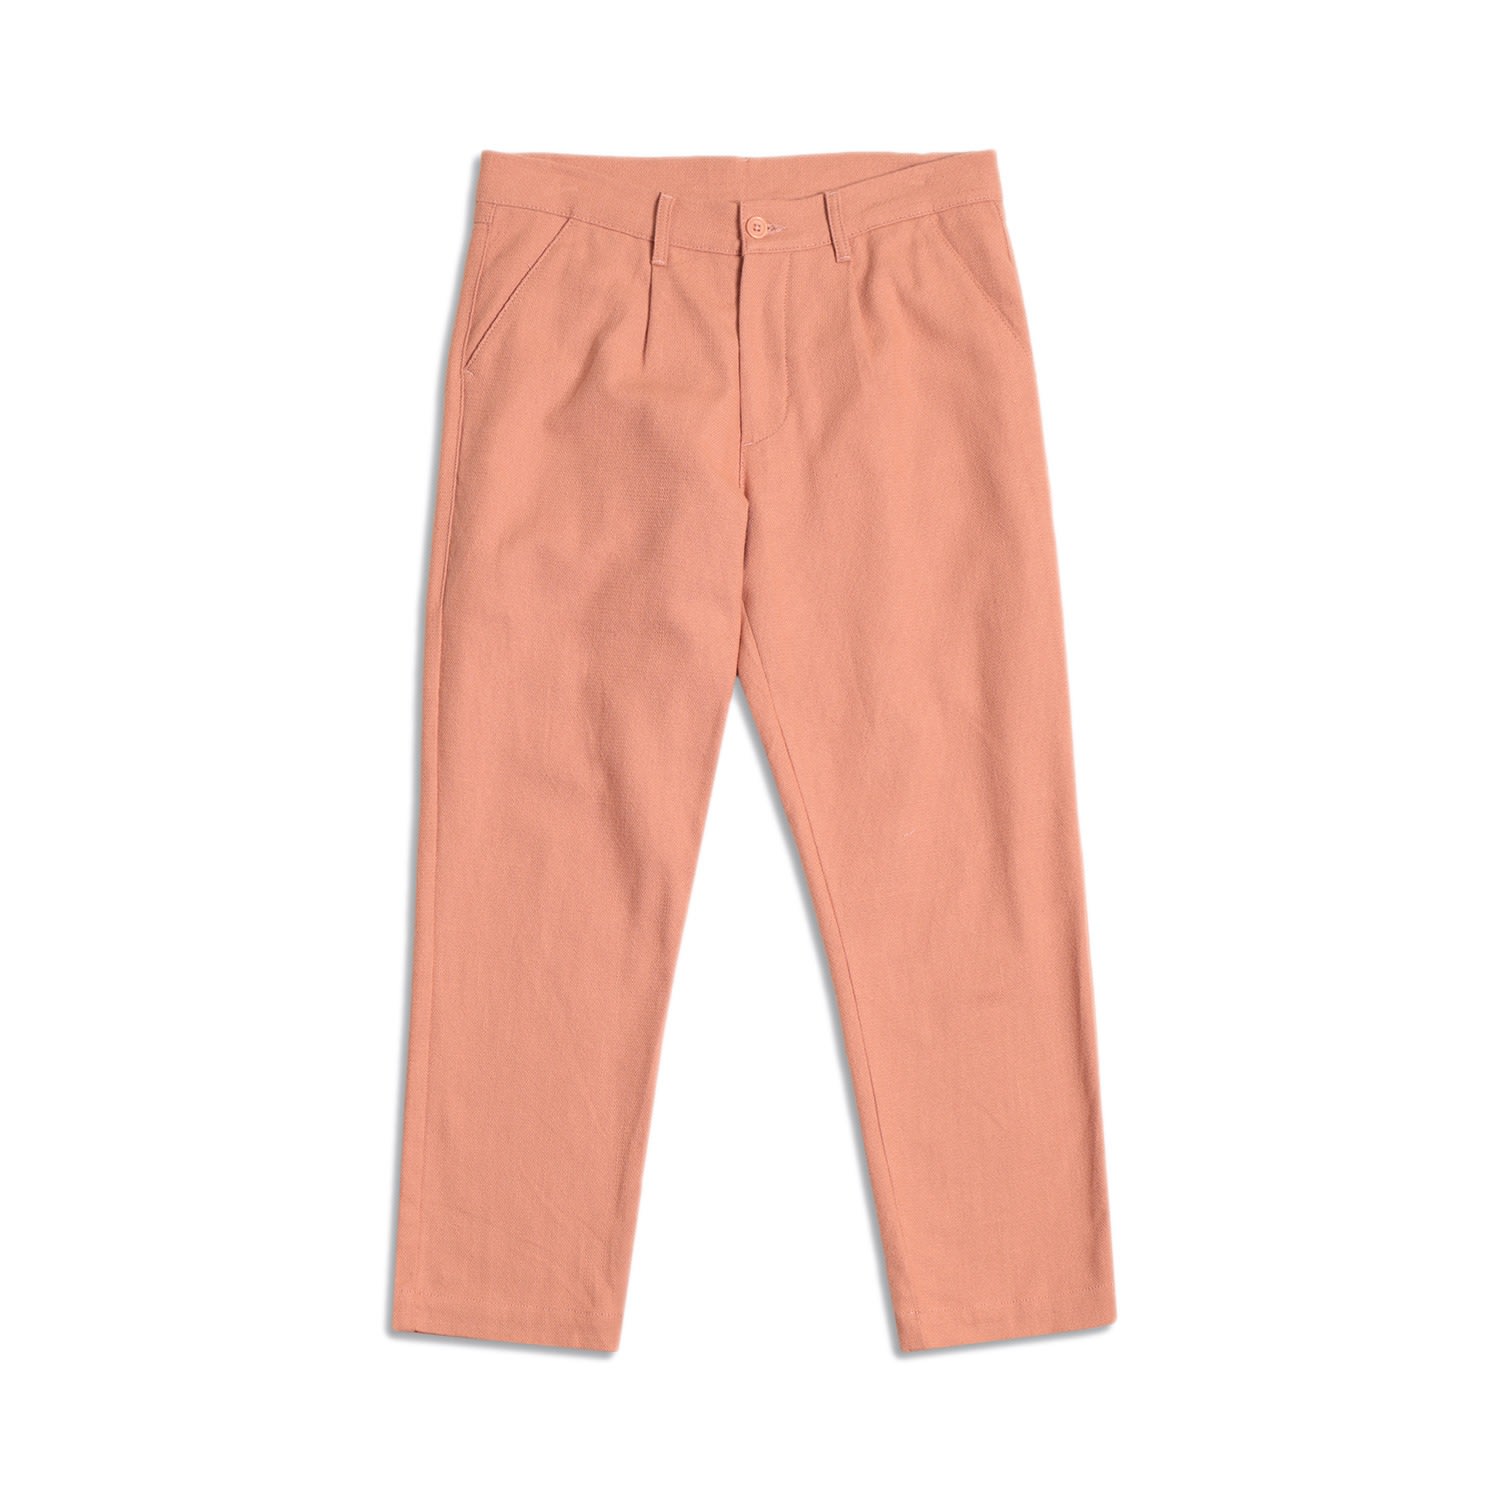 Far Afield Men's Ryder Trouser - Mahogany Pink In Brown/pink